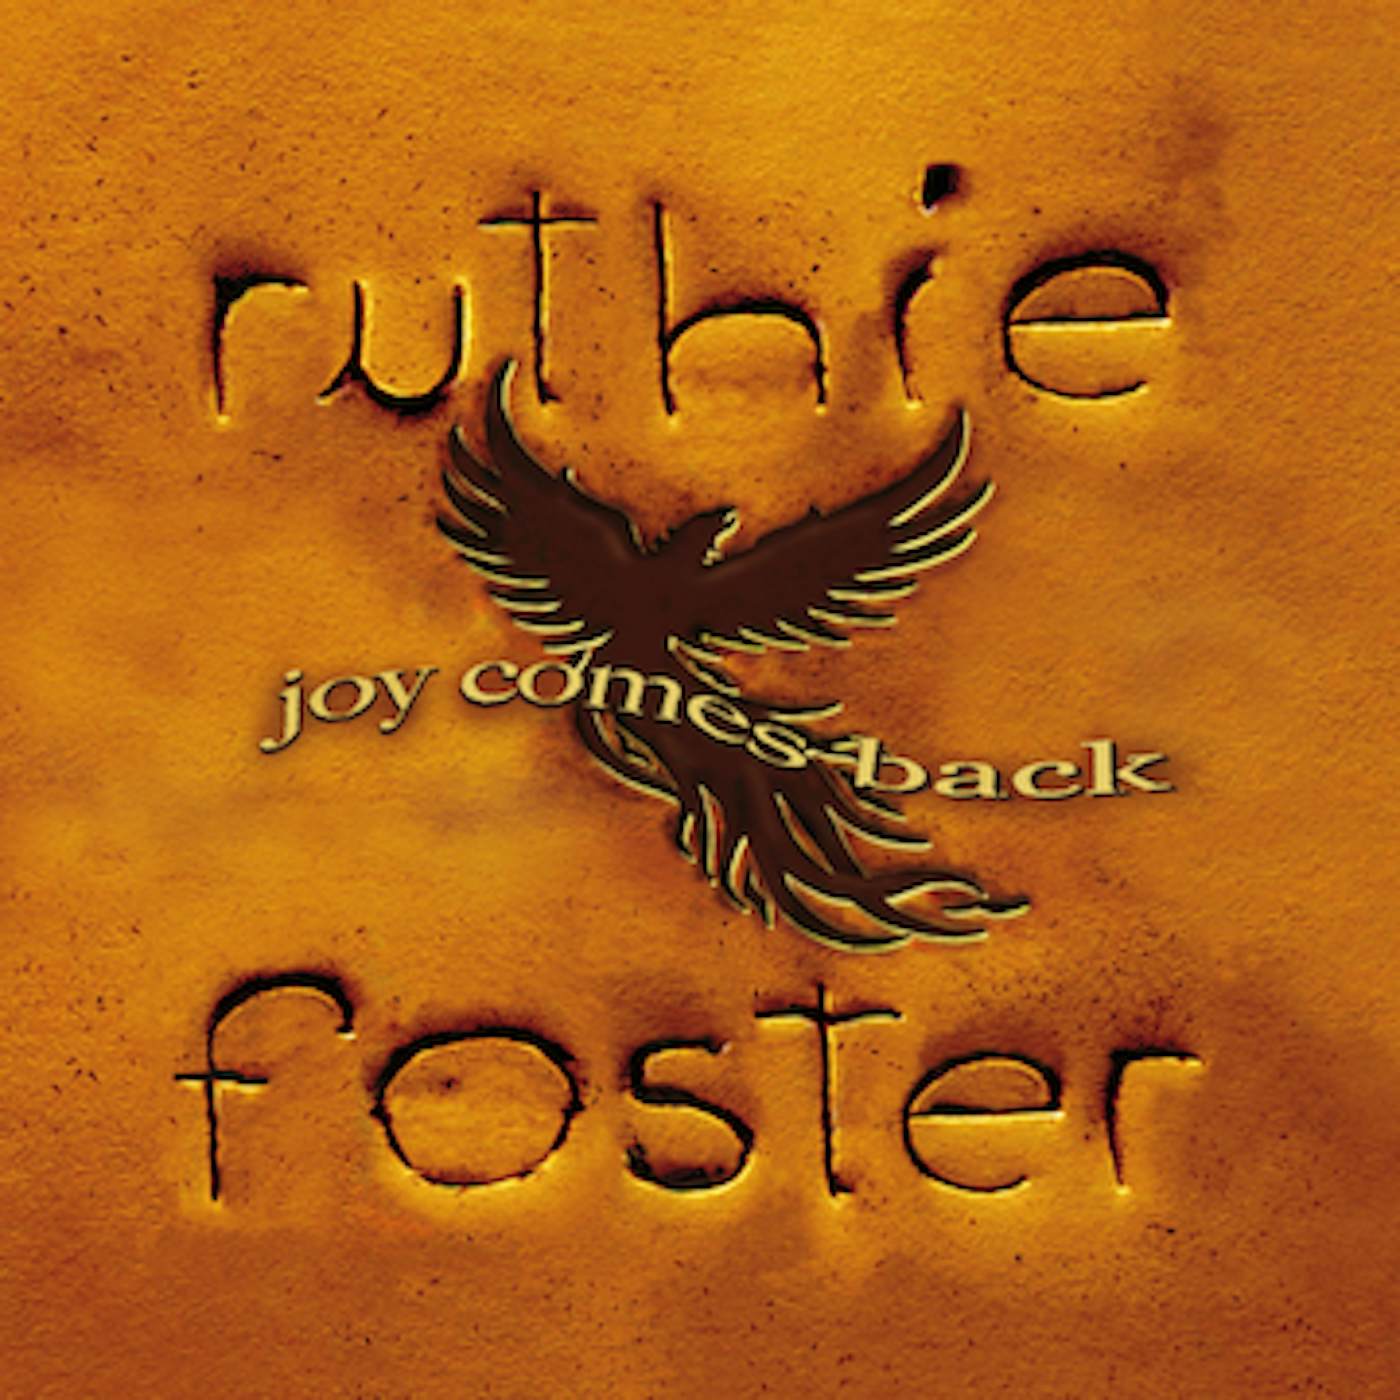 Ruthie Foster JOY COMES BACK CD